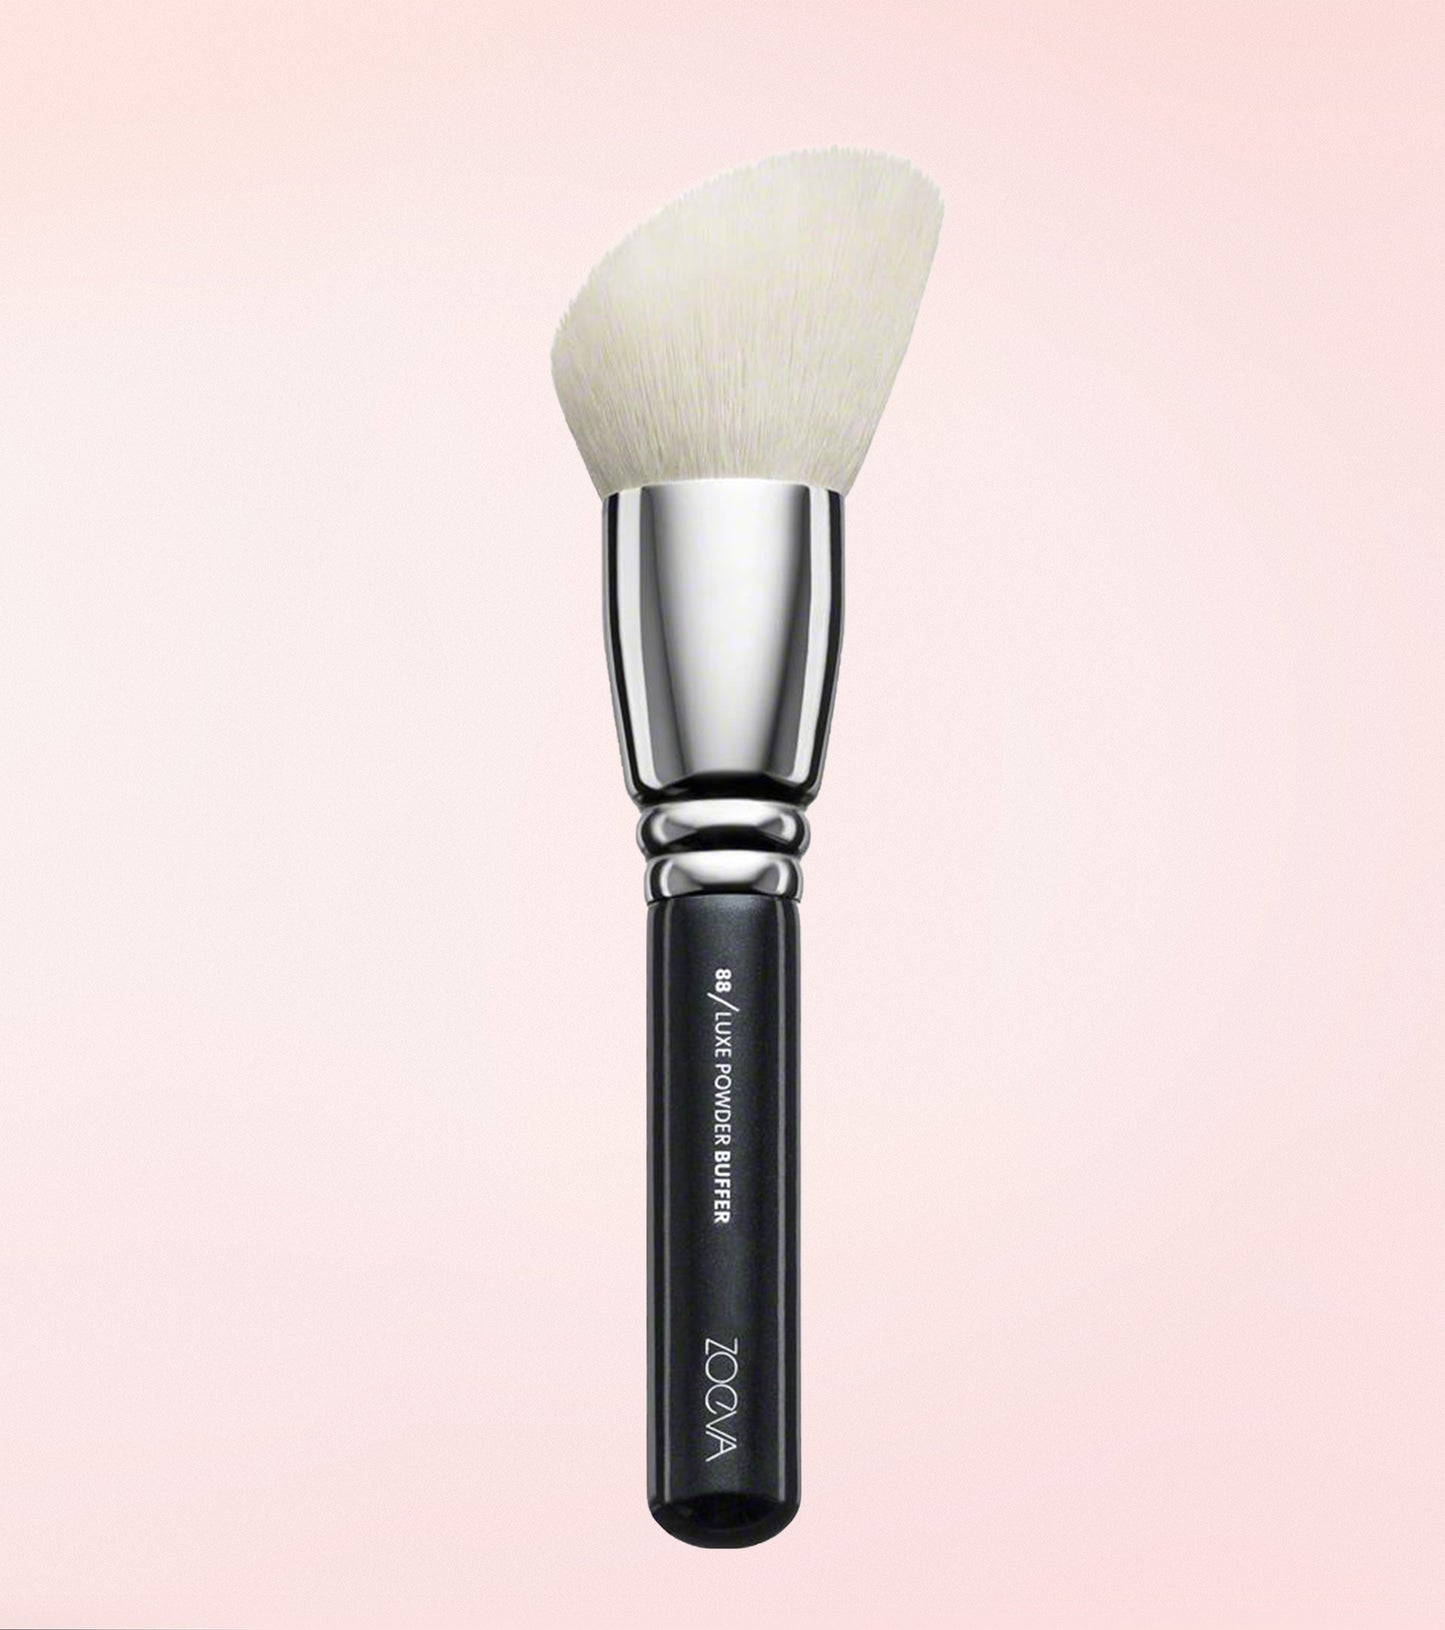 088 Luxe Powder Buffer Brush Expanded Image 3